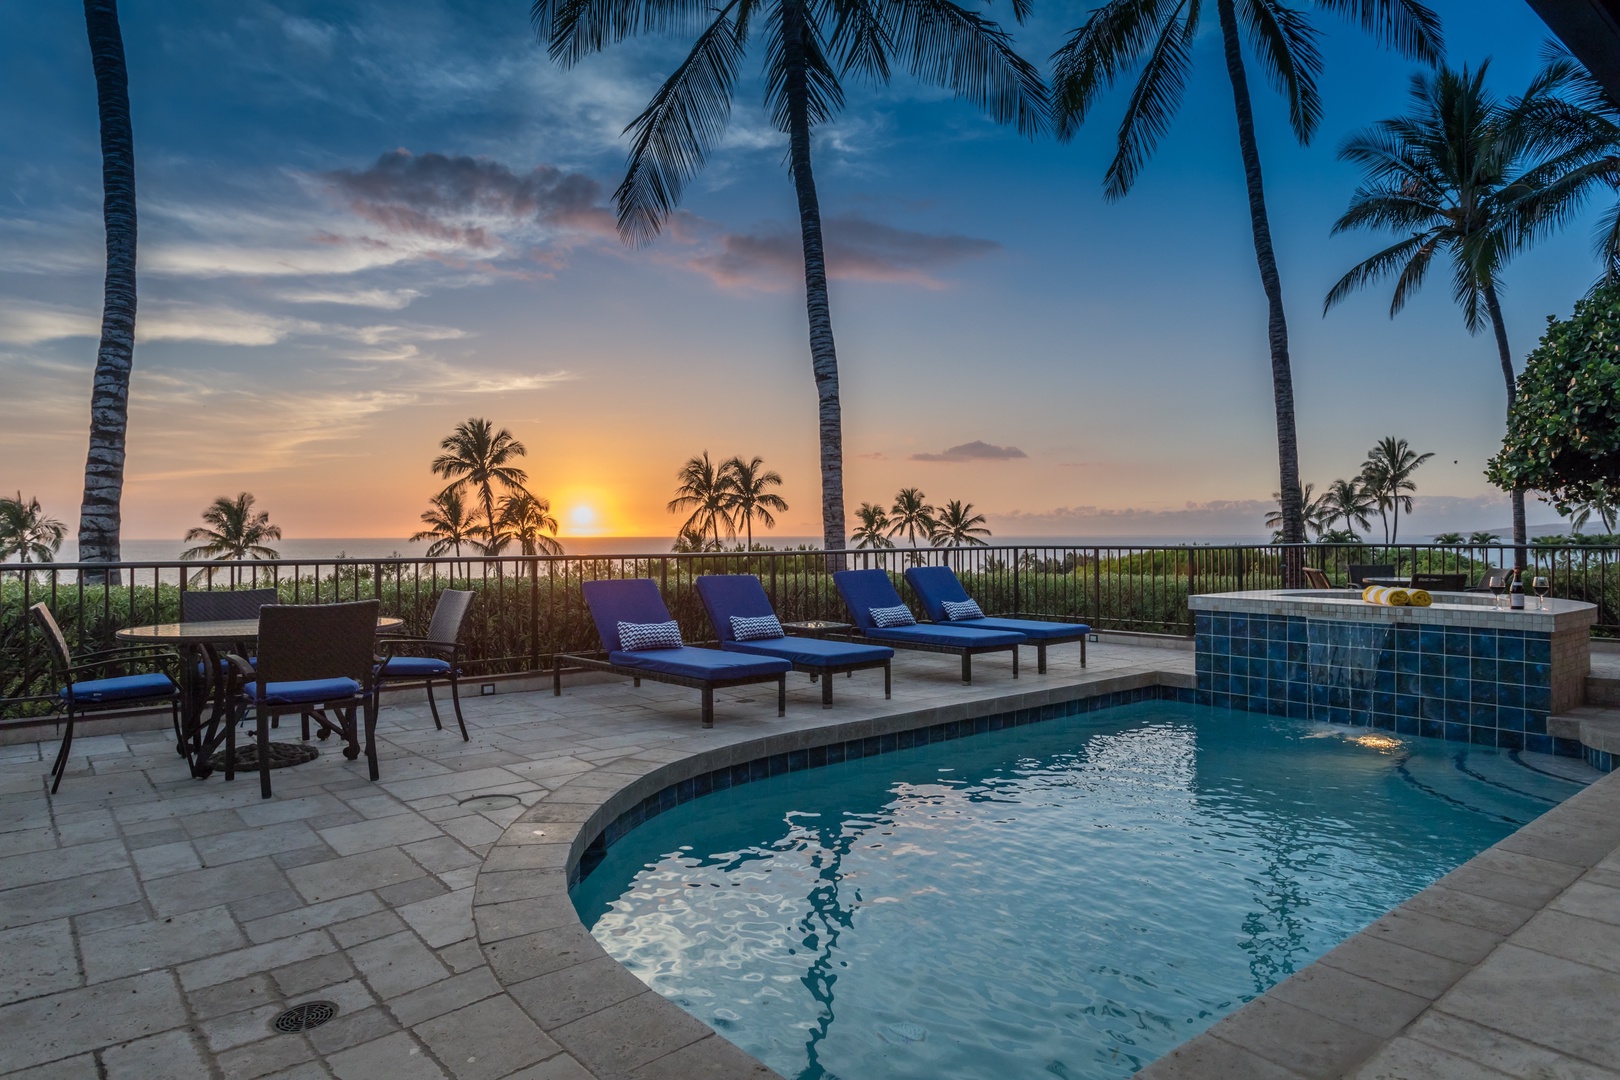 Kamuela Vacation Rentals, OFB 3BD Villas (39) at Mauna Kea Resort - Gorgeous ocean and sunset views from private pool deck.